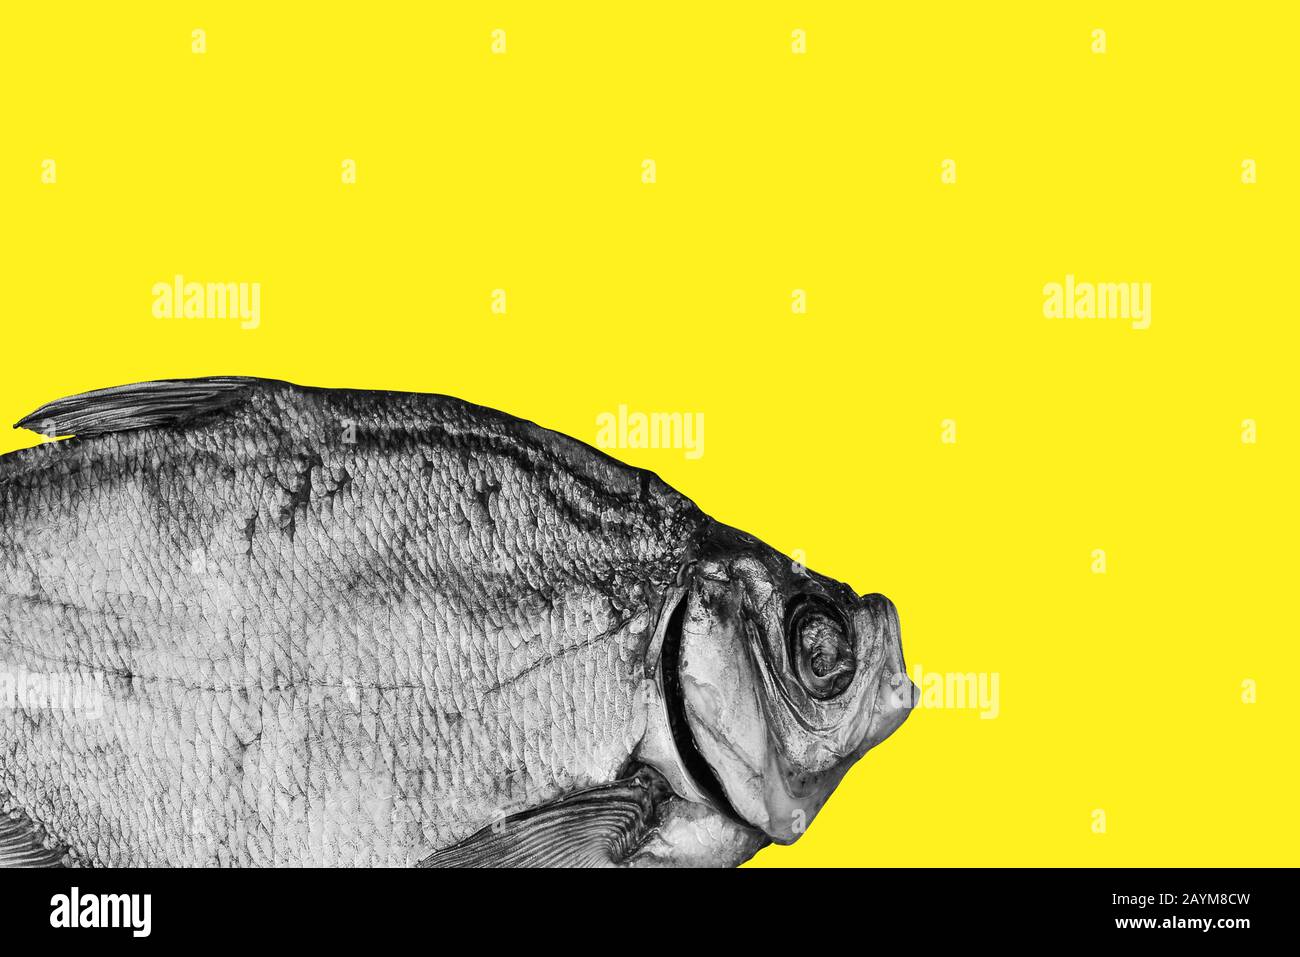 Dried black and white fish on a yellow background. Art gallery design, collage Stock Photo